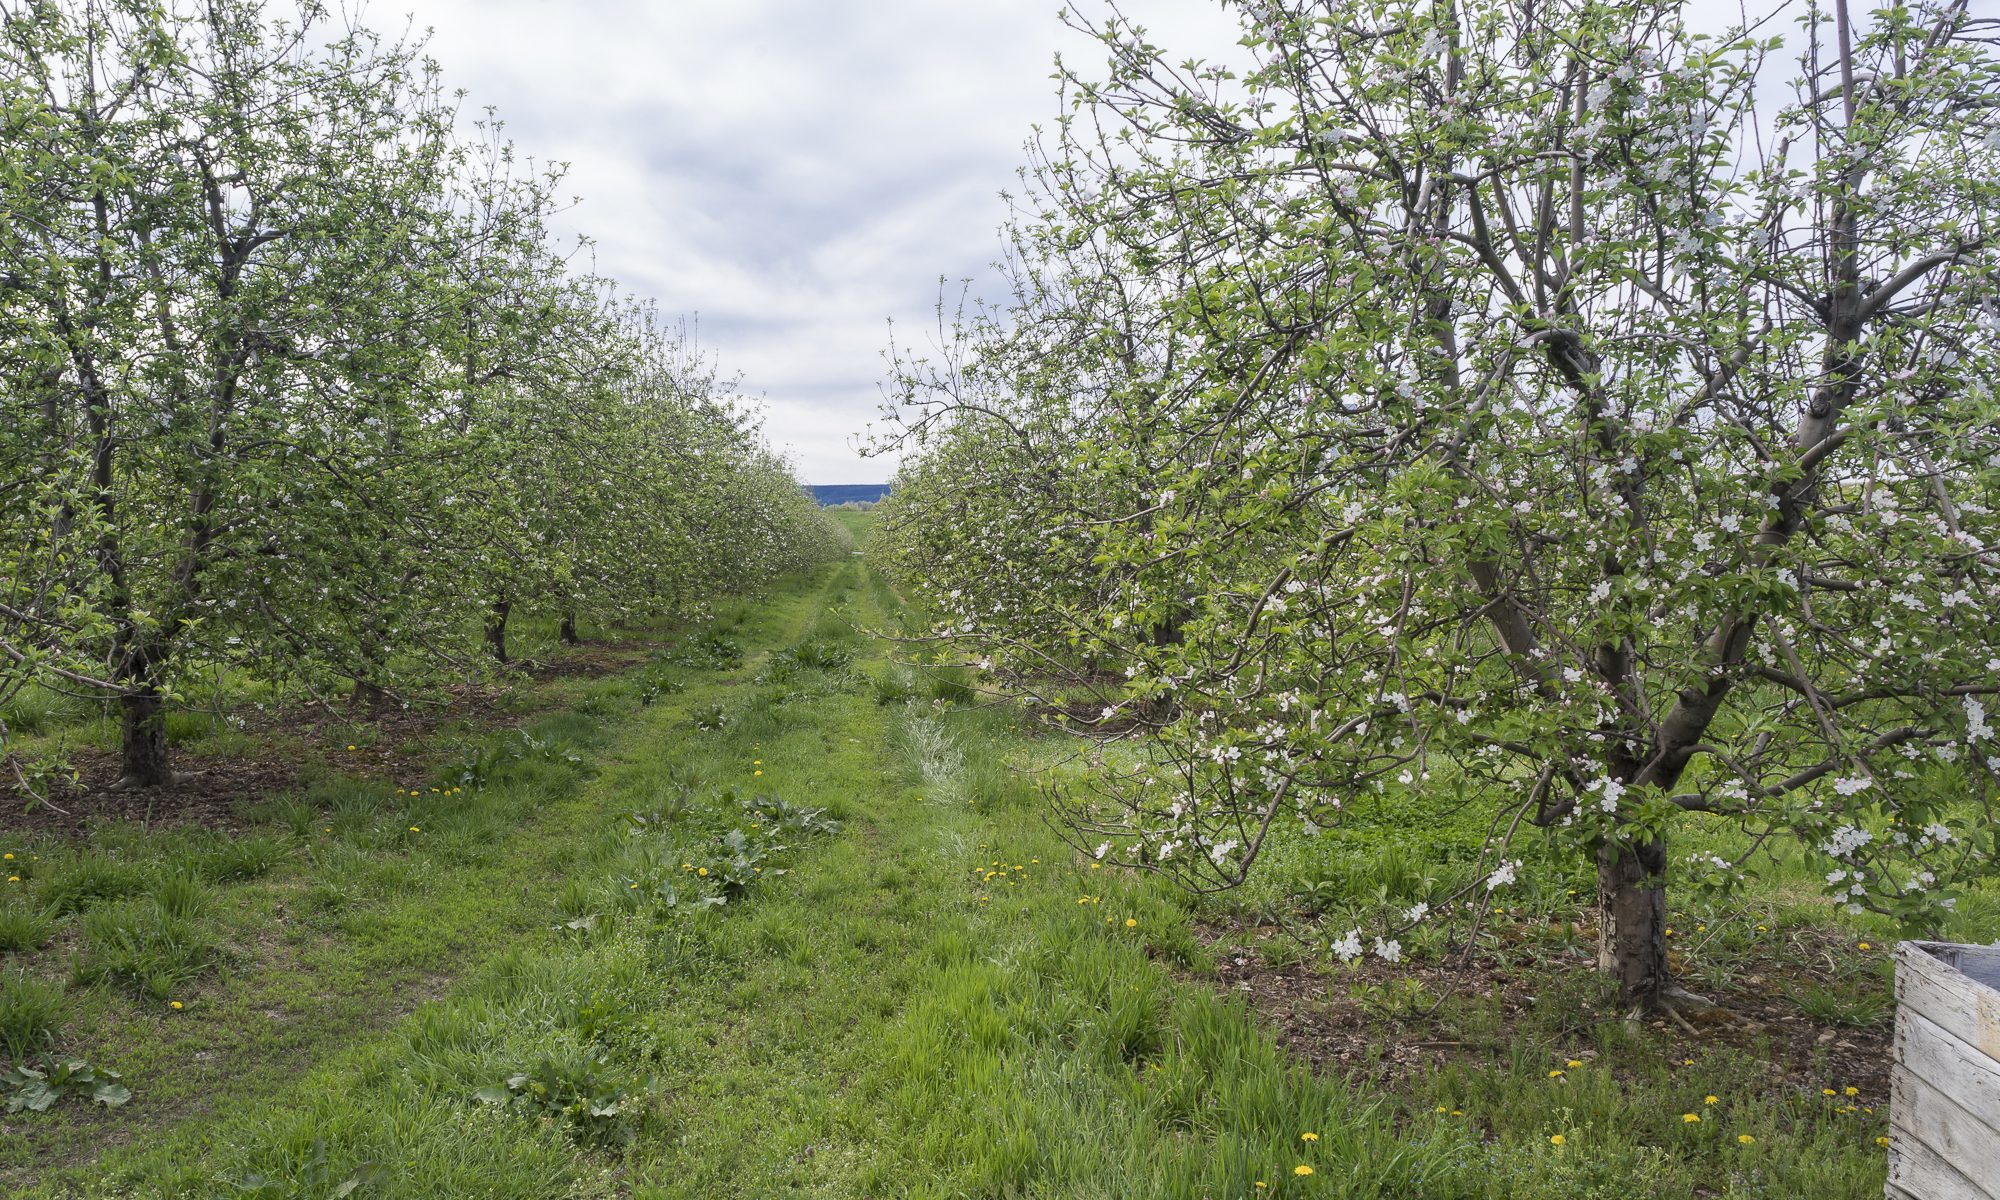 APPLE ORCHARDS IN THE SPRING - APRIL 2019